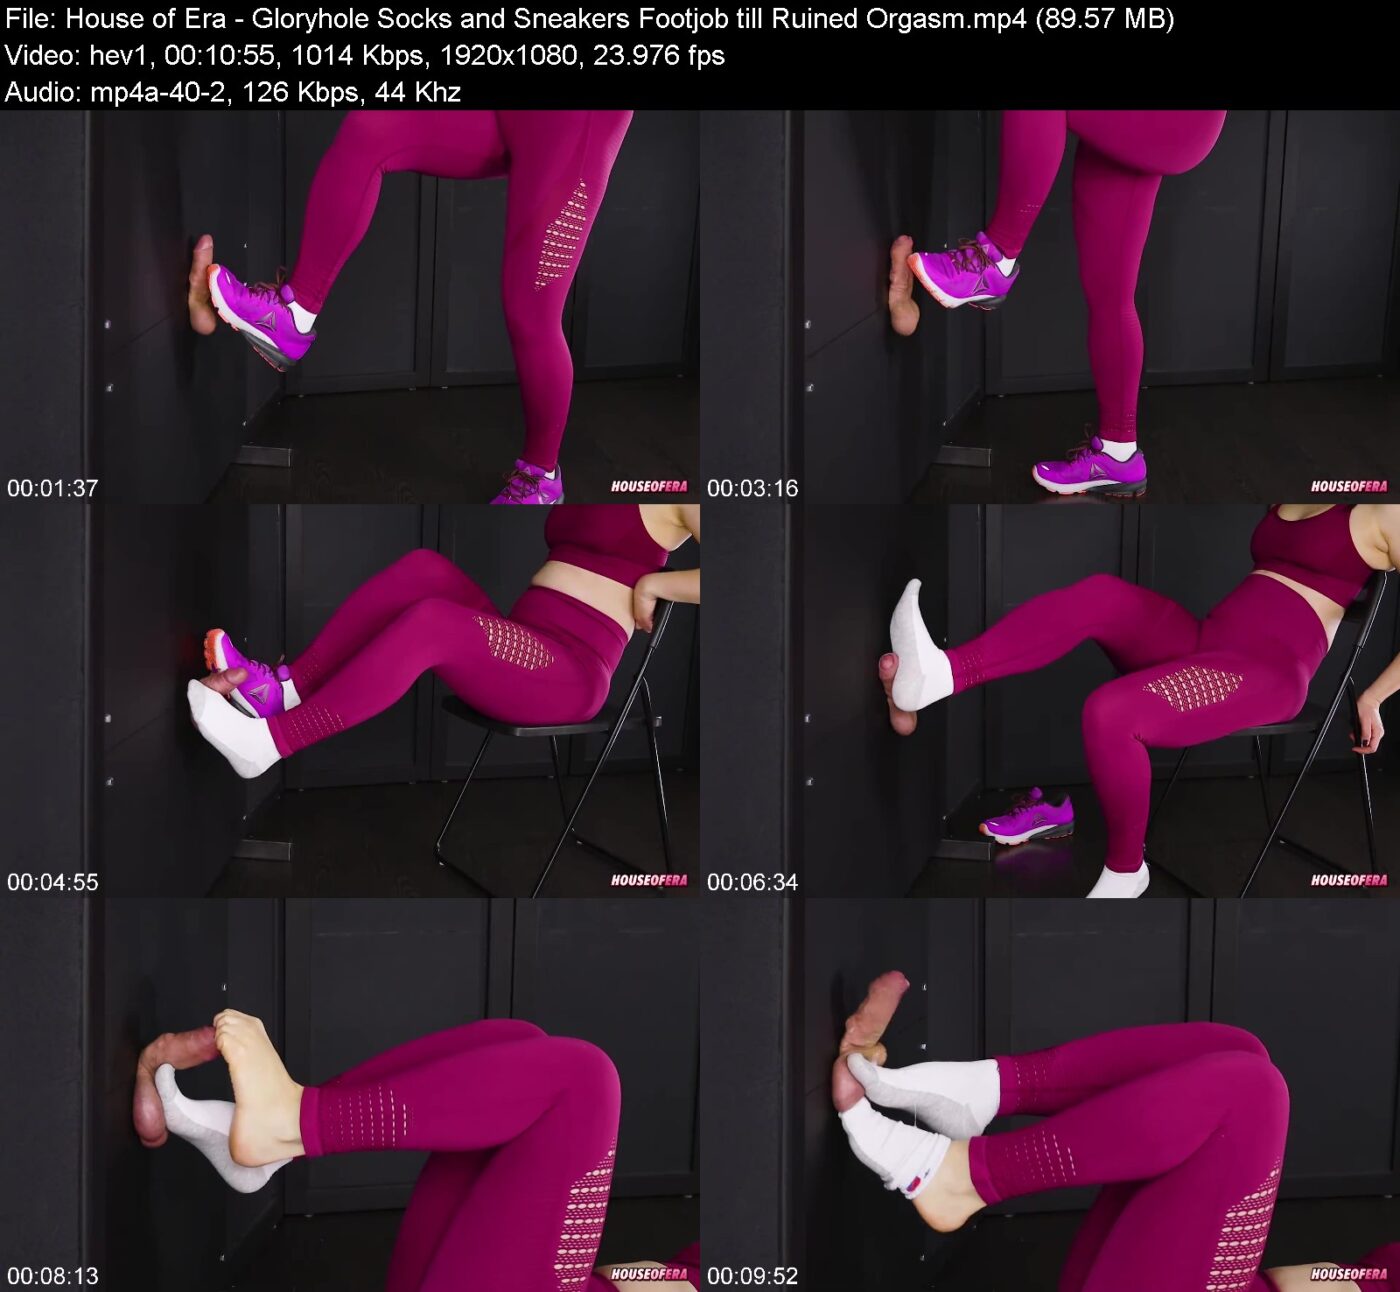 Actress: House of Era. Title and Studio: Gloryhole Socks and Sneakers Footjob till Ruined Orgasm